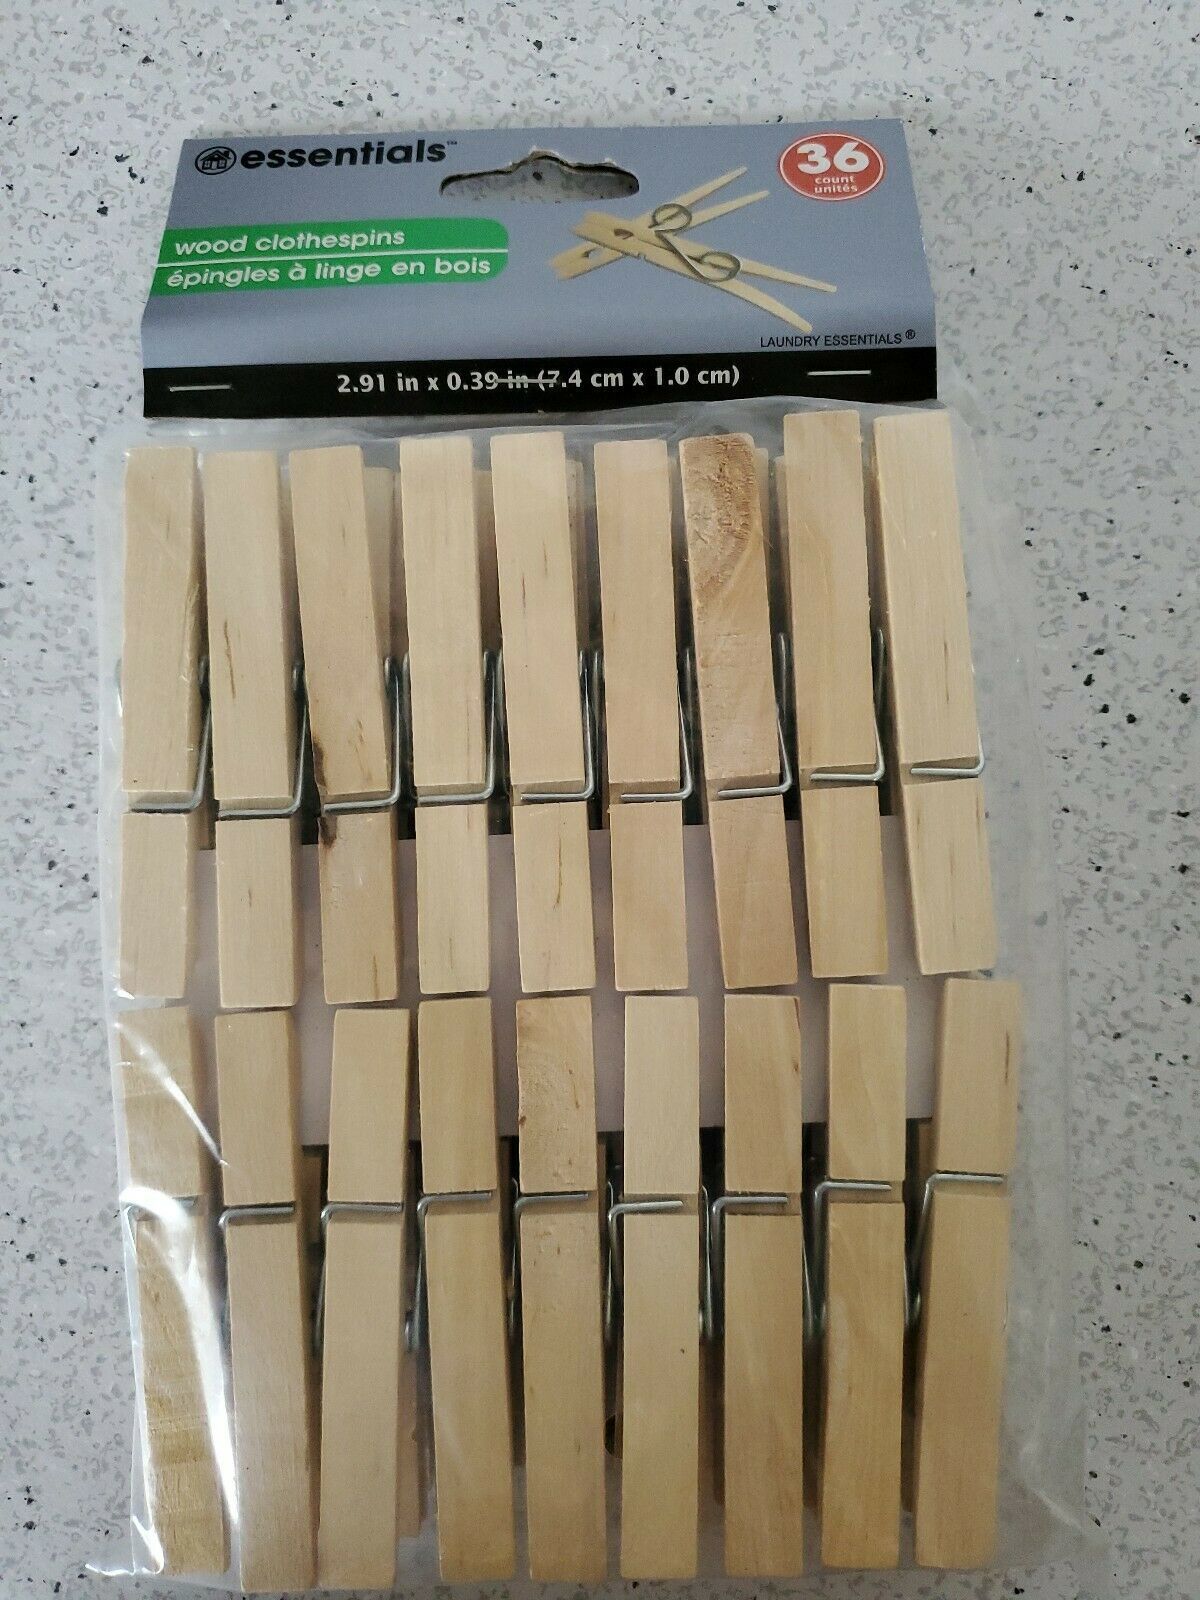 CLOTHES PINS WOODEN 36 COUNT NEW IN PACK ESSENTIALS 